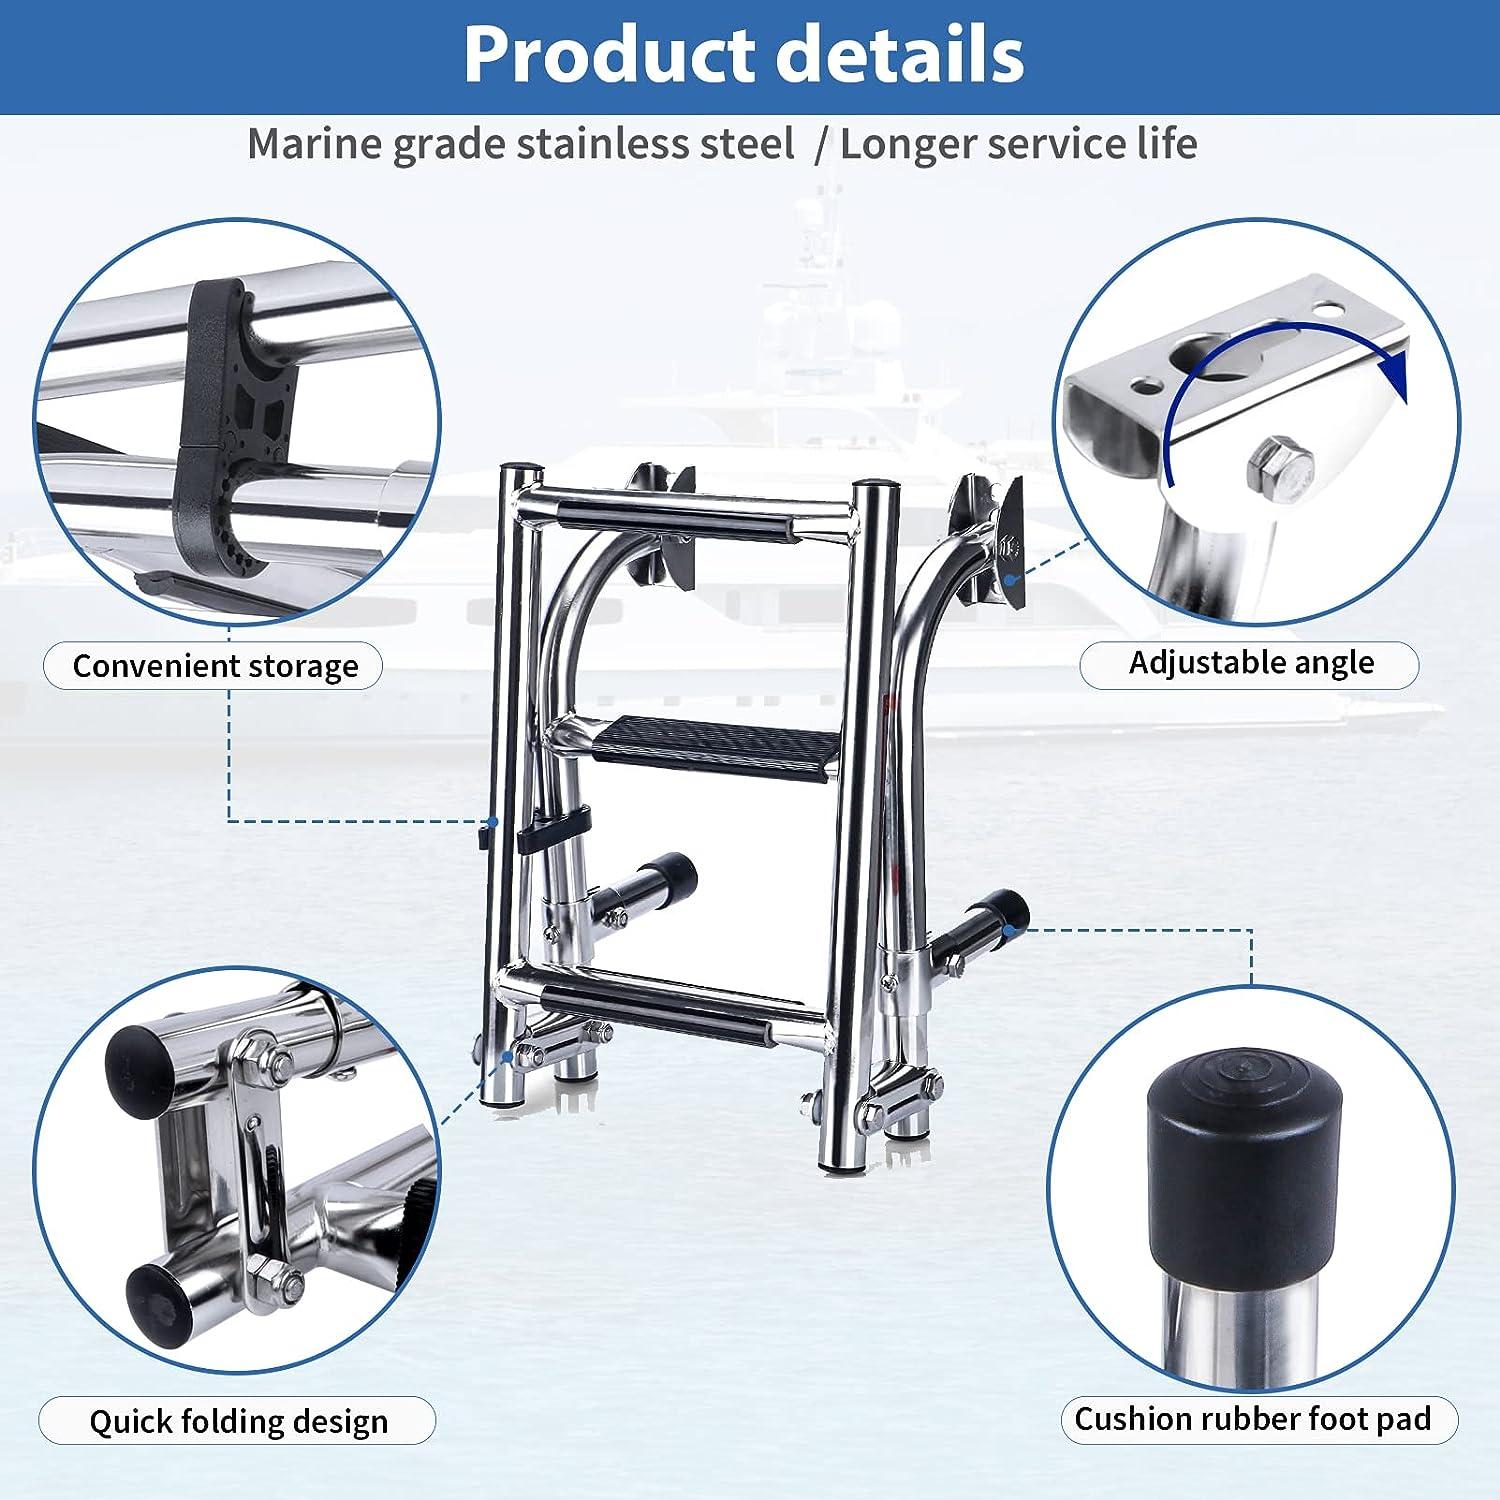 Marinebaby Stainless Steel Folding Boat Boarding Ladder for